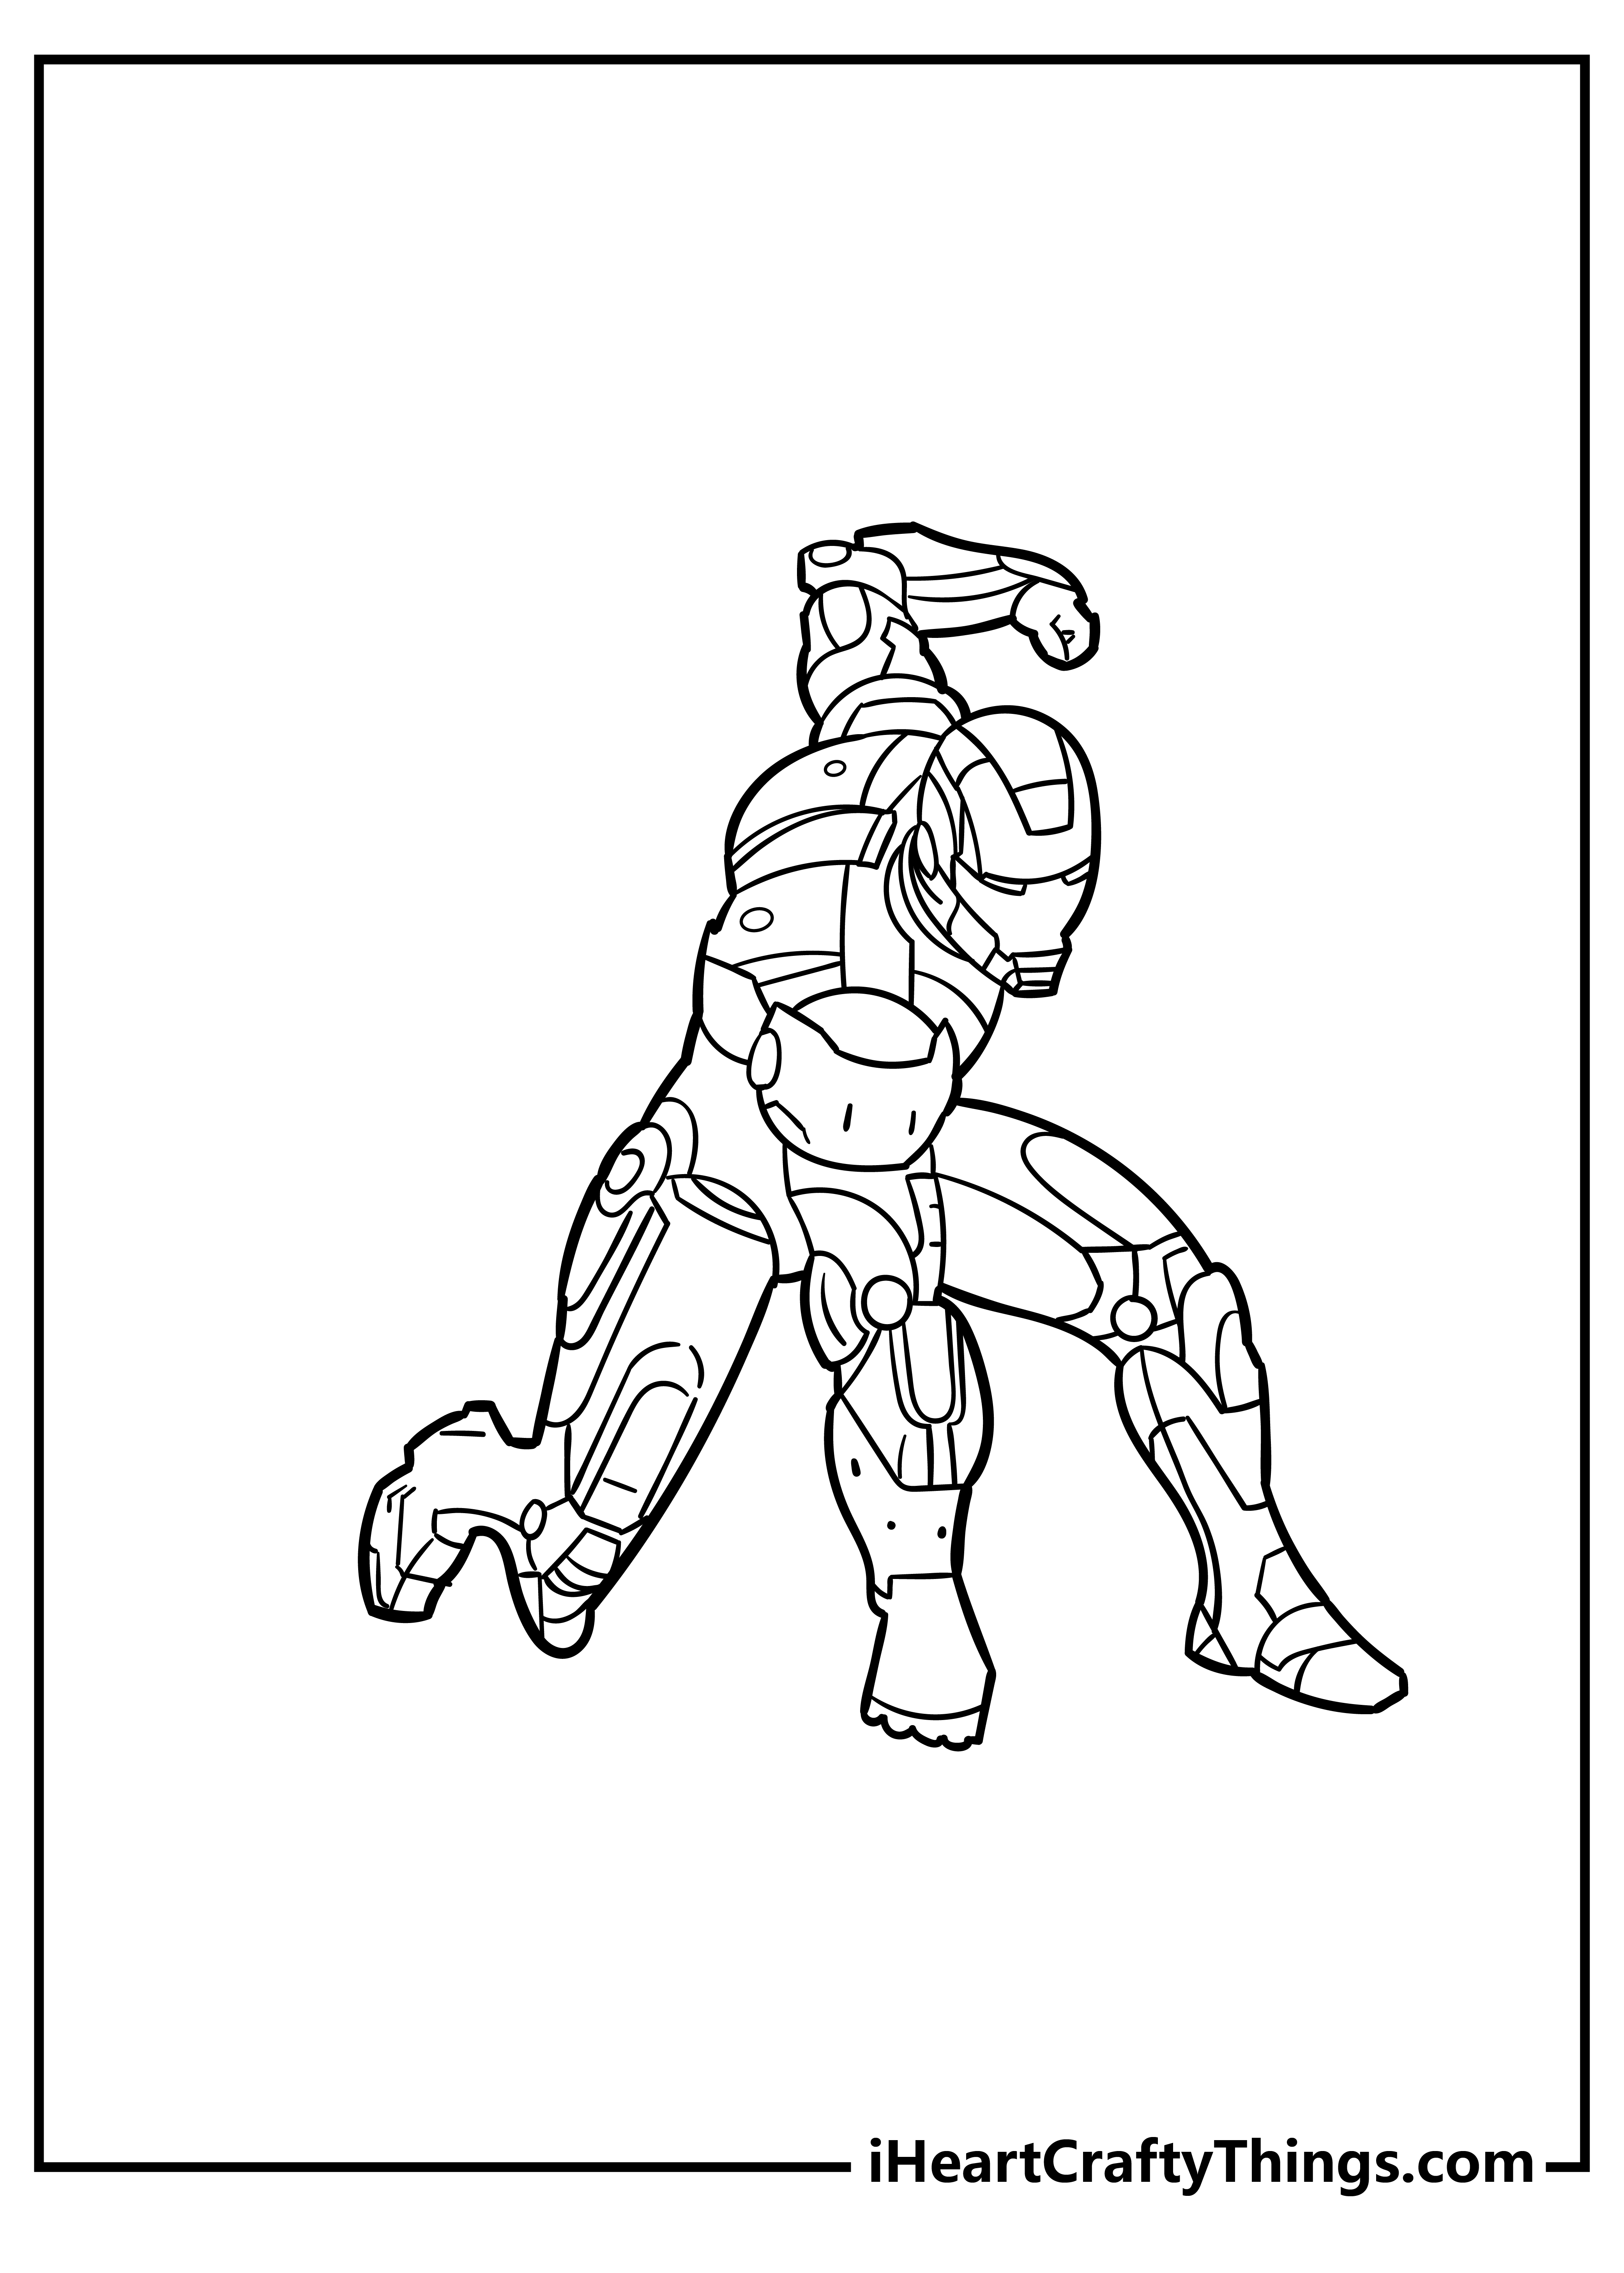 Iron Man Coloring Pages for kids free download